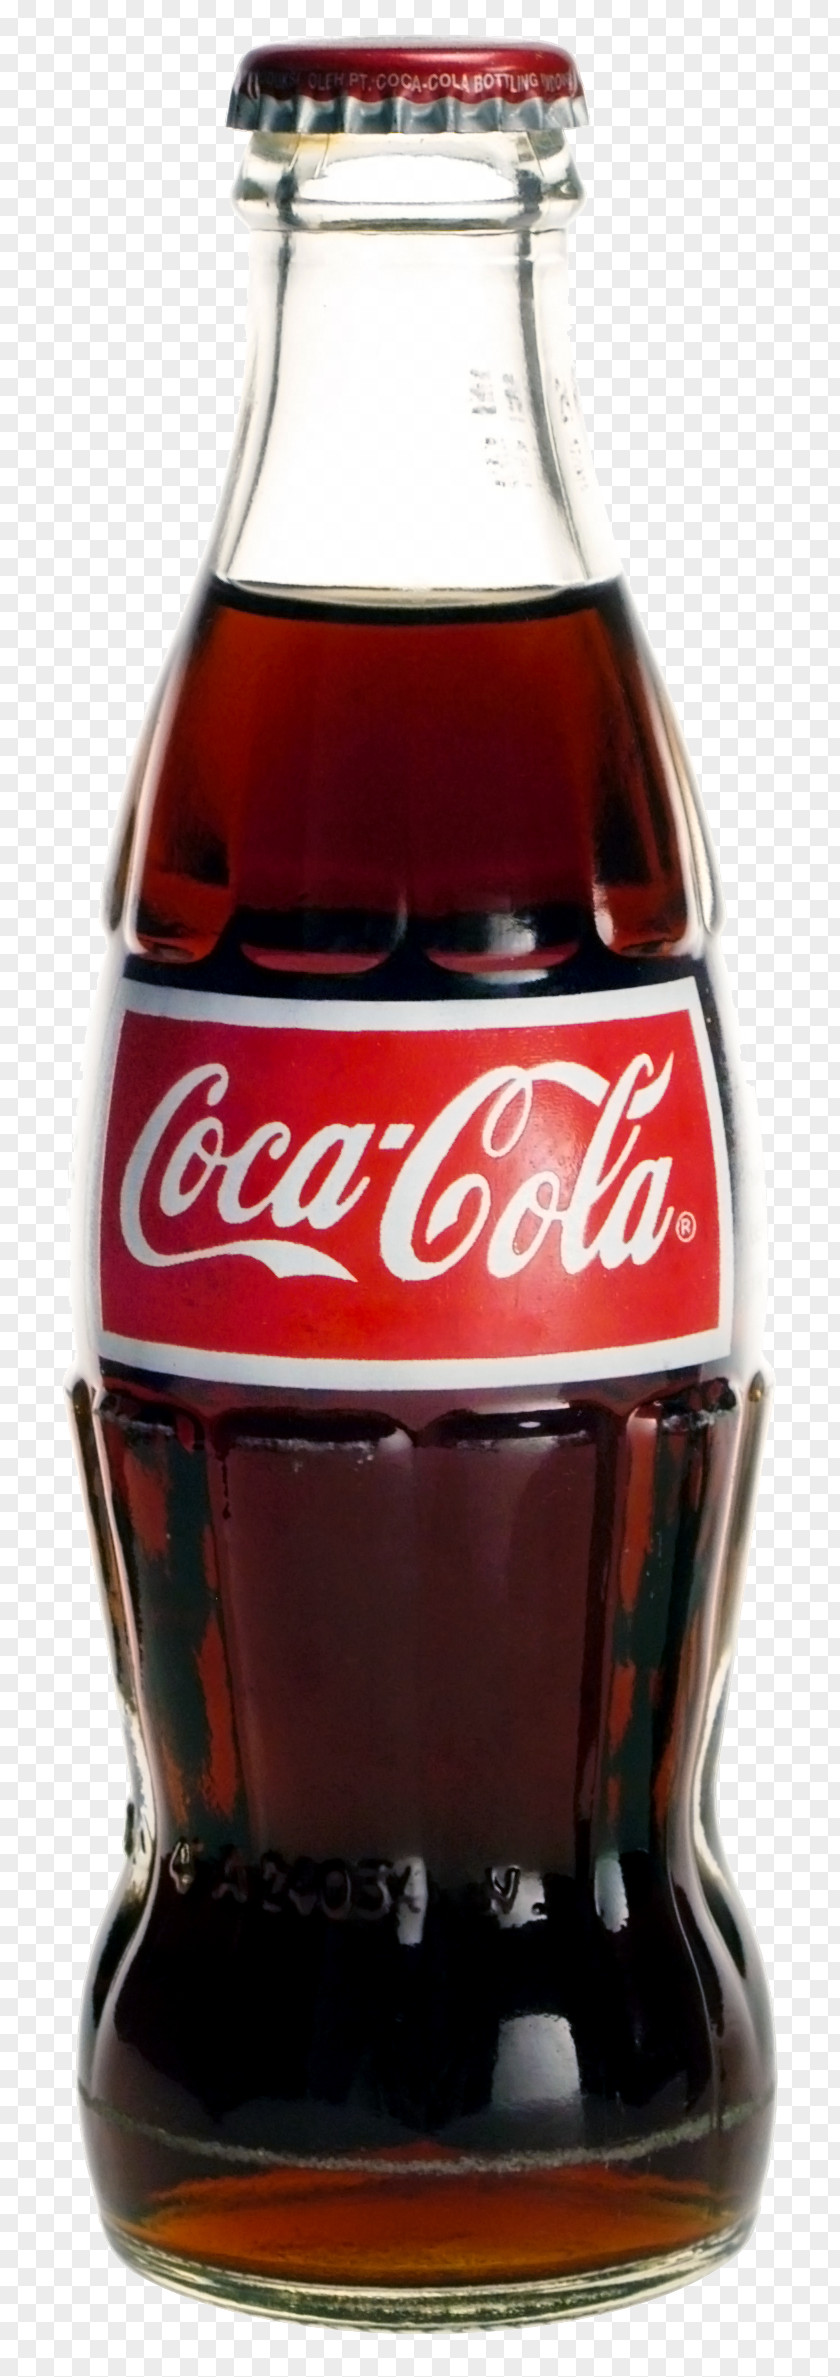 Coca The Coca-Cola Company Fizzy Drinks Bottle PNG